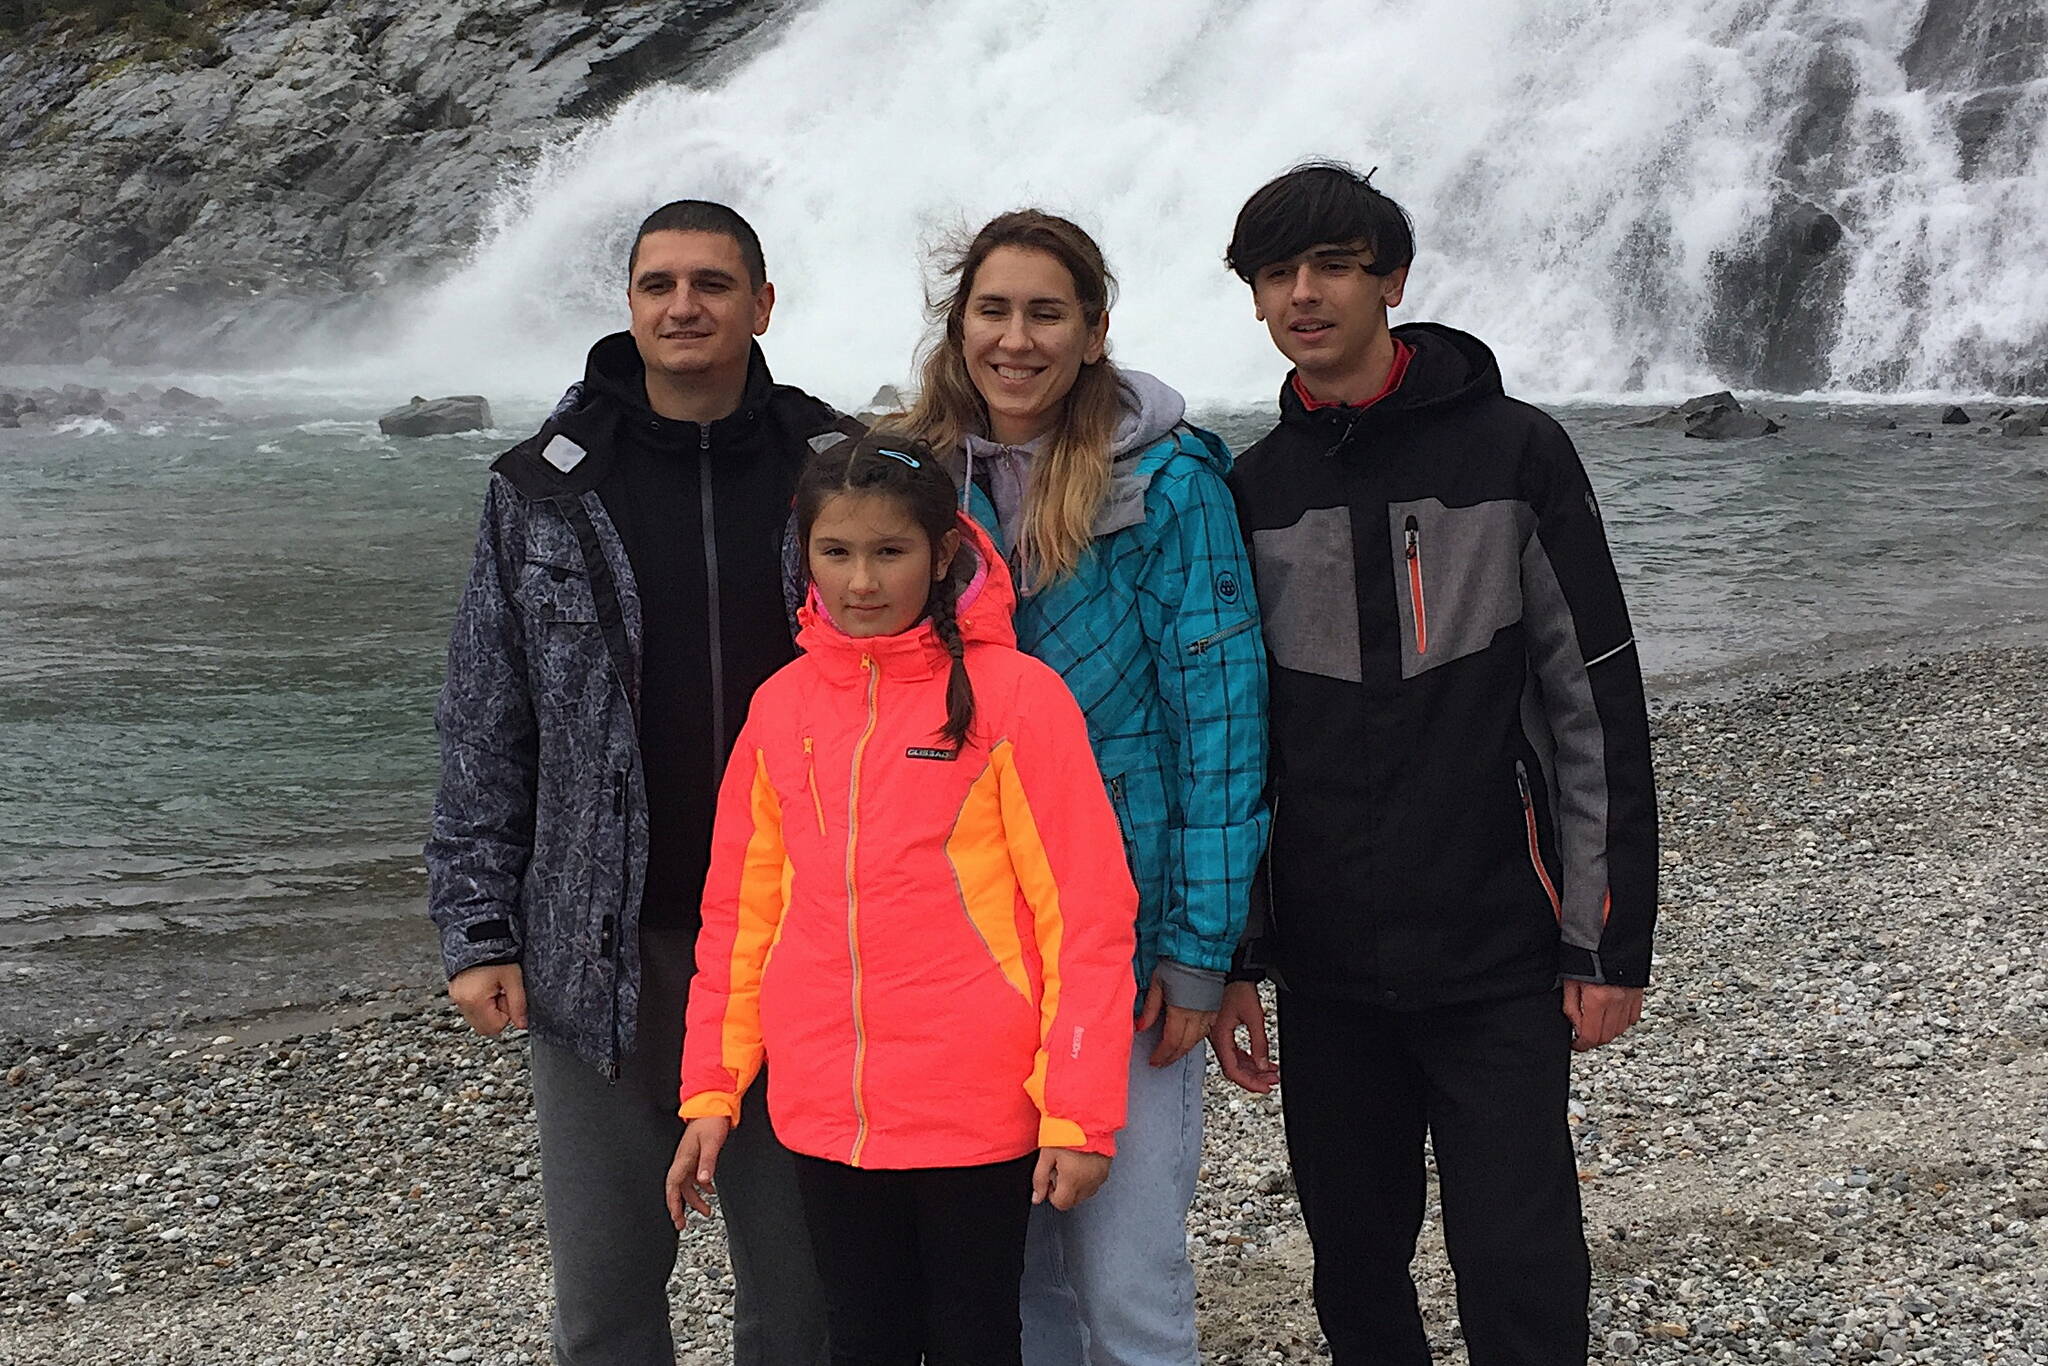 Andrii Pomynalnyi, left, his wife Olena, son Yehor and daughter Irynka visit Nugget Falls on Sept. 28, the same day the Ukrainian family arrived in Juneau after a journey that began Feb. 24 with Russian attacks near their home in Kyiv. The father said he is hoping the family can remain in Juneau for at least two years and possible beyond due to the destruction and future uncertainty in his homeland. (Courtesy of Kate Troll)